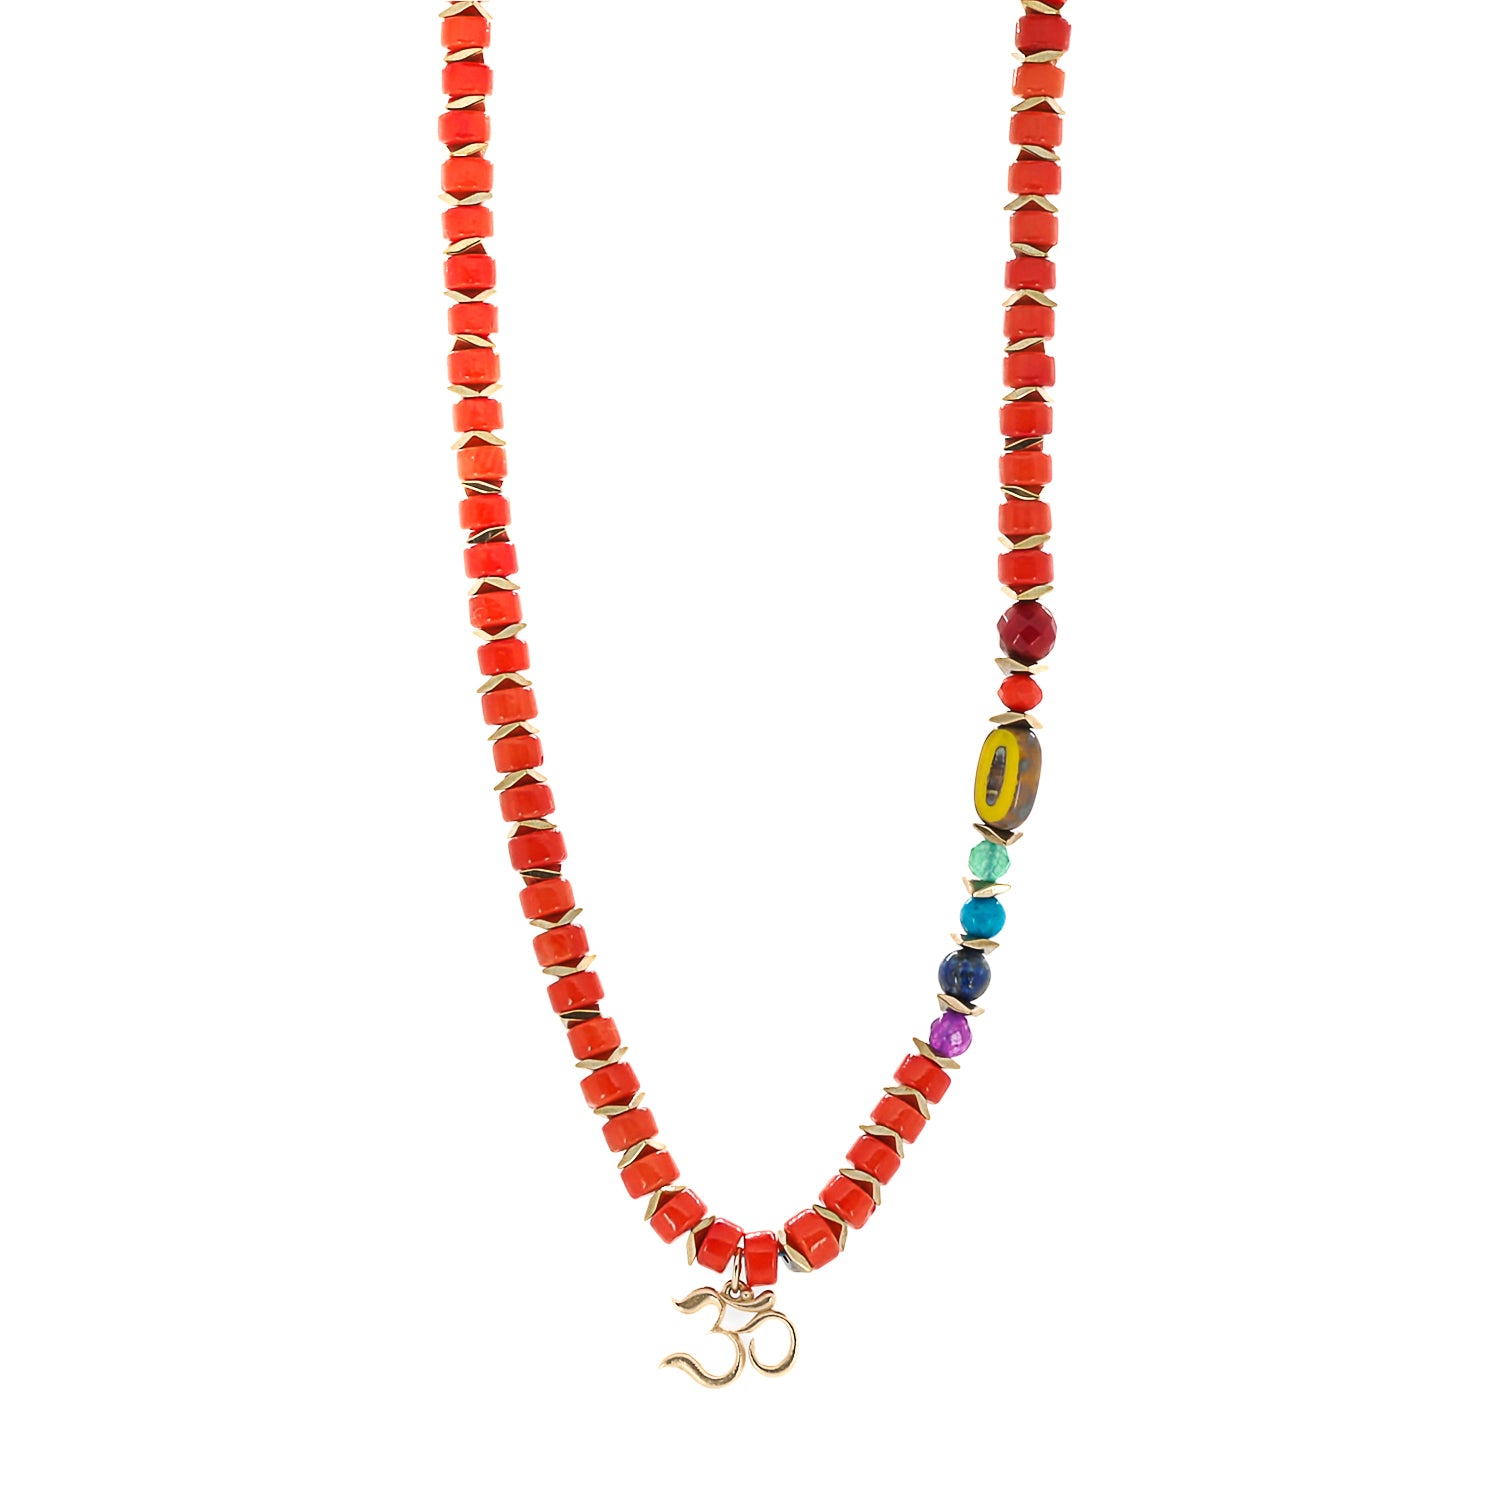 14K Gold Om Pendant Chakra Necklace featuring a beautifully handcrafted Om pendant in 14K yellow gold, surrounded by chakra-colored natural beads and coral stones.